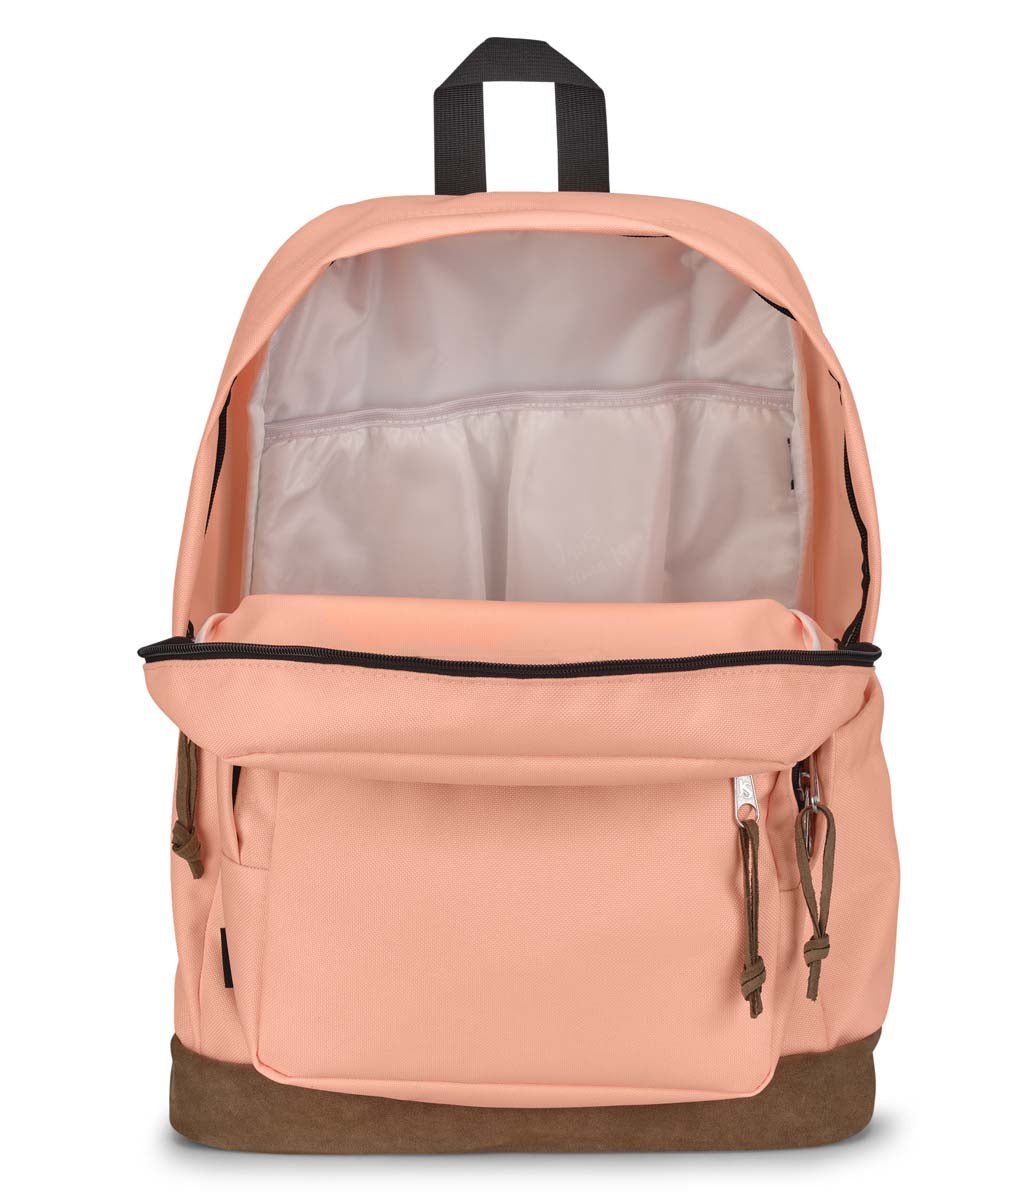 JanSport Right Pack Backpack - Peach Neon